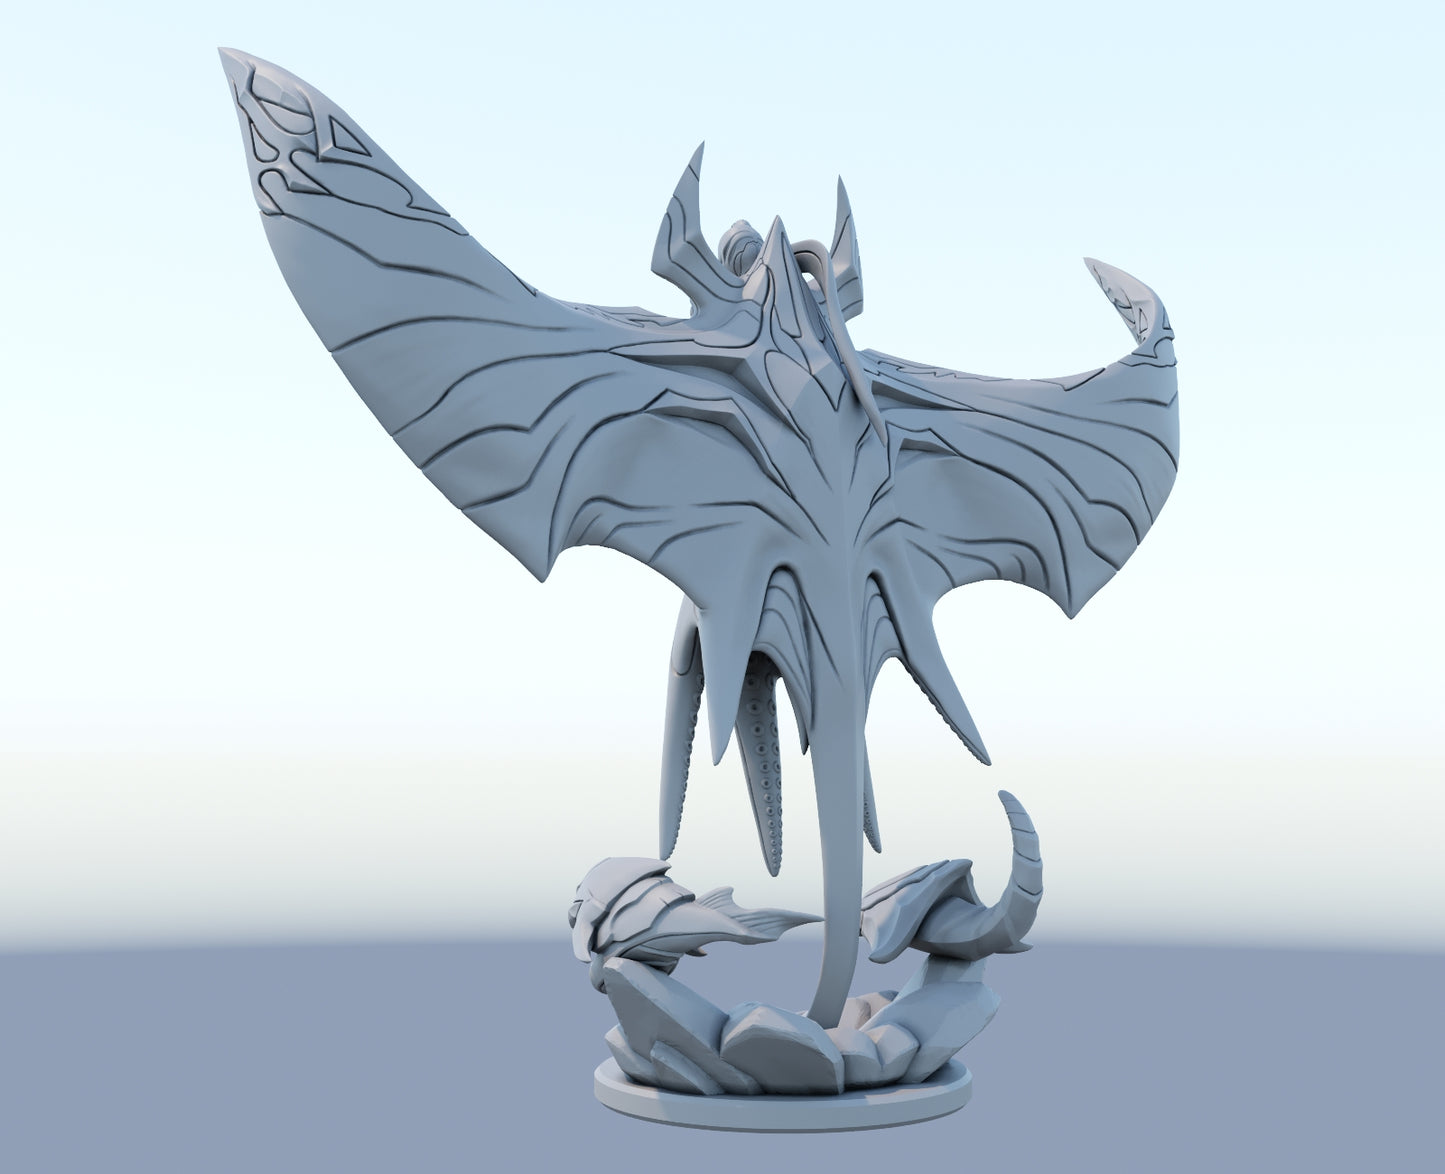 Belveth 3D-printed League of Legends champion figure. Decorate your gaming setup or home with your favorite League of Legends champion! Choose between the unpainted version, perfect for you to paint yourself, or the hand-painted version by a professional painter. Order your figure today!